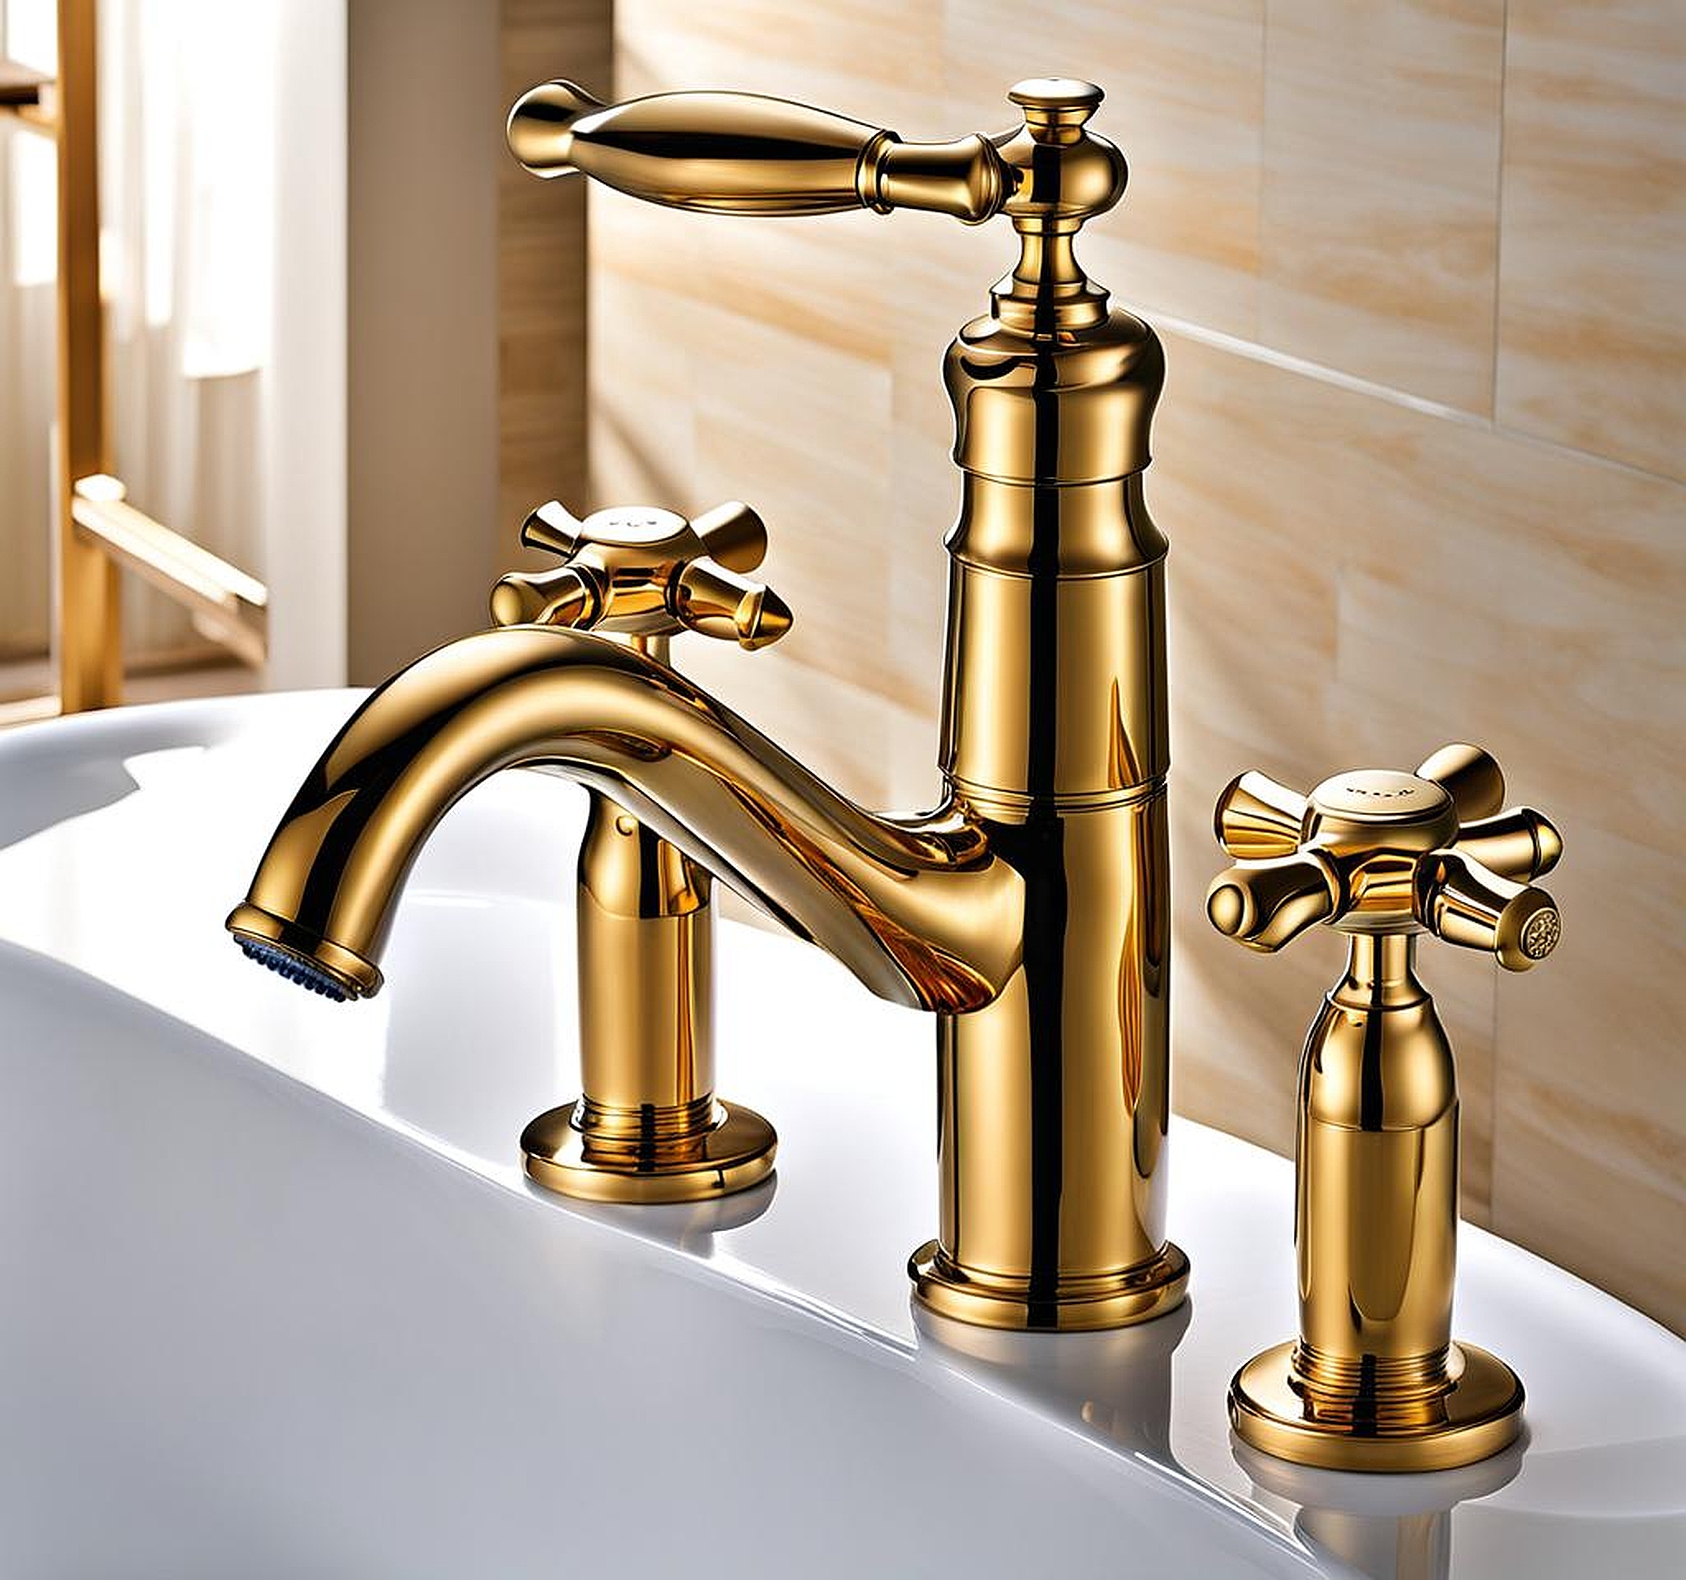 Understanding Types of Bathtub Faucet Handles and Their Design Aesthetic Appeal